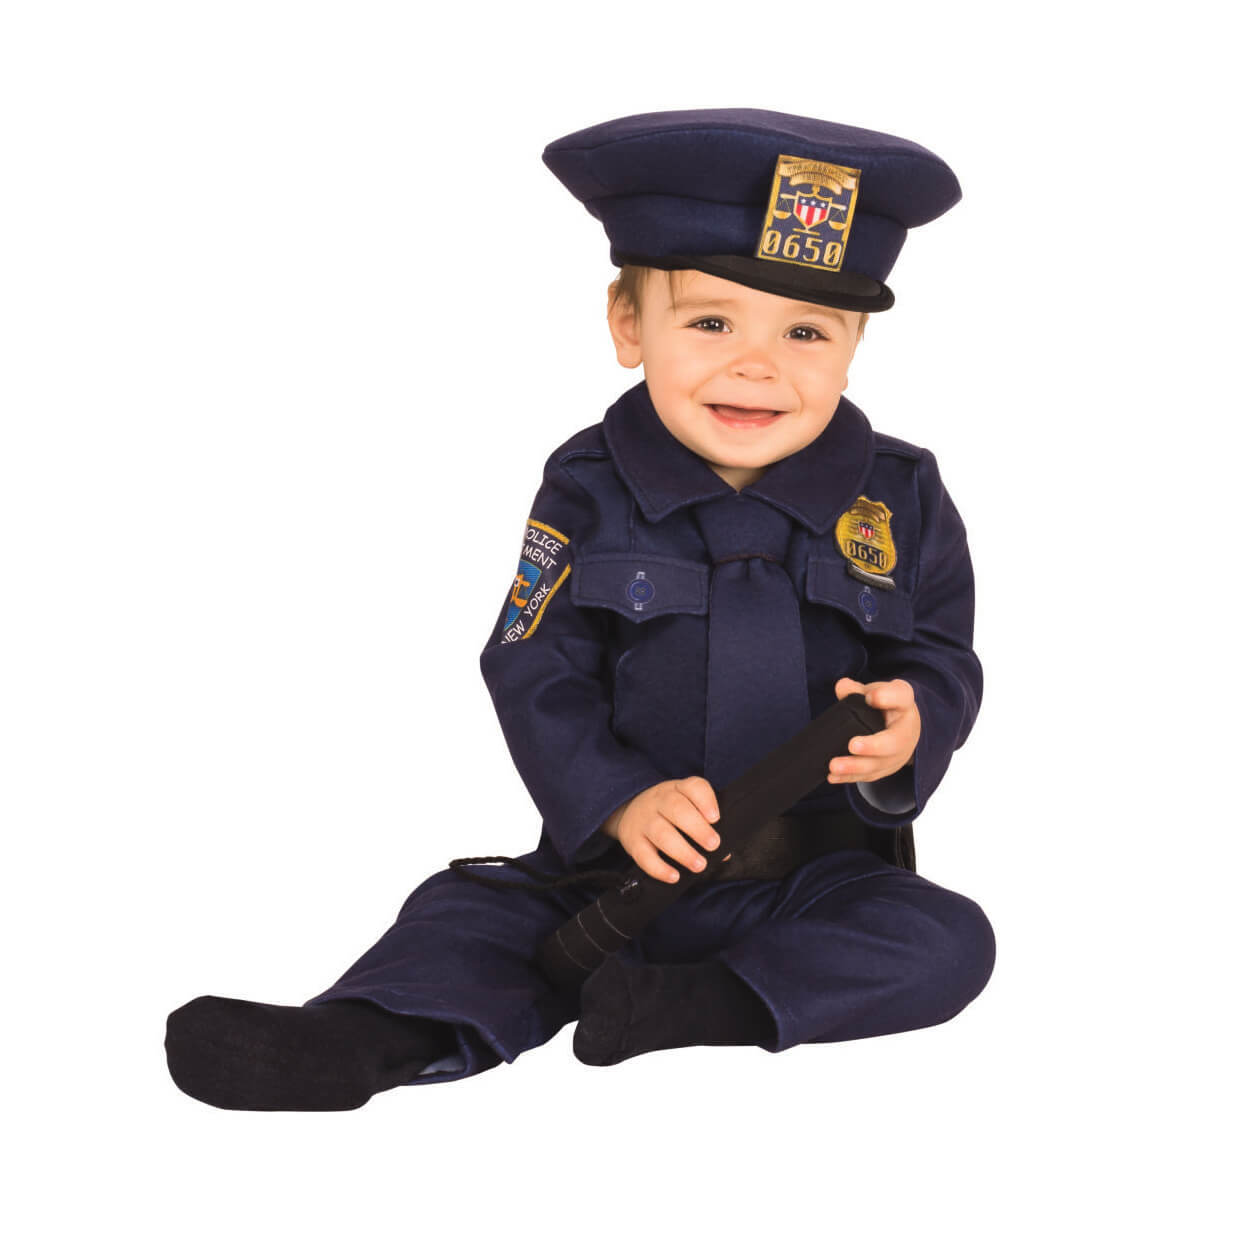 Rubies Police Toddler Costume